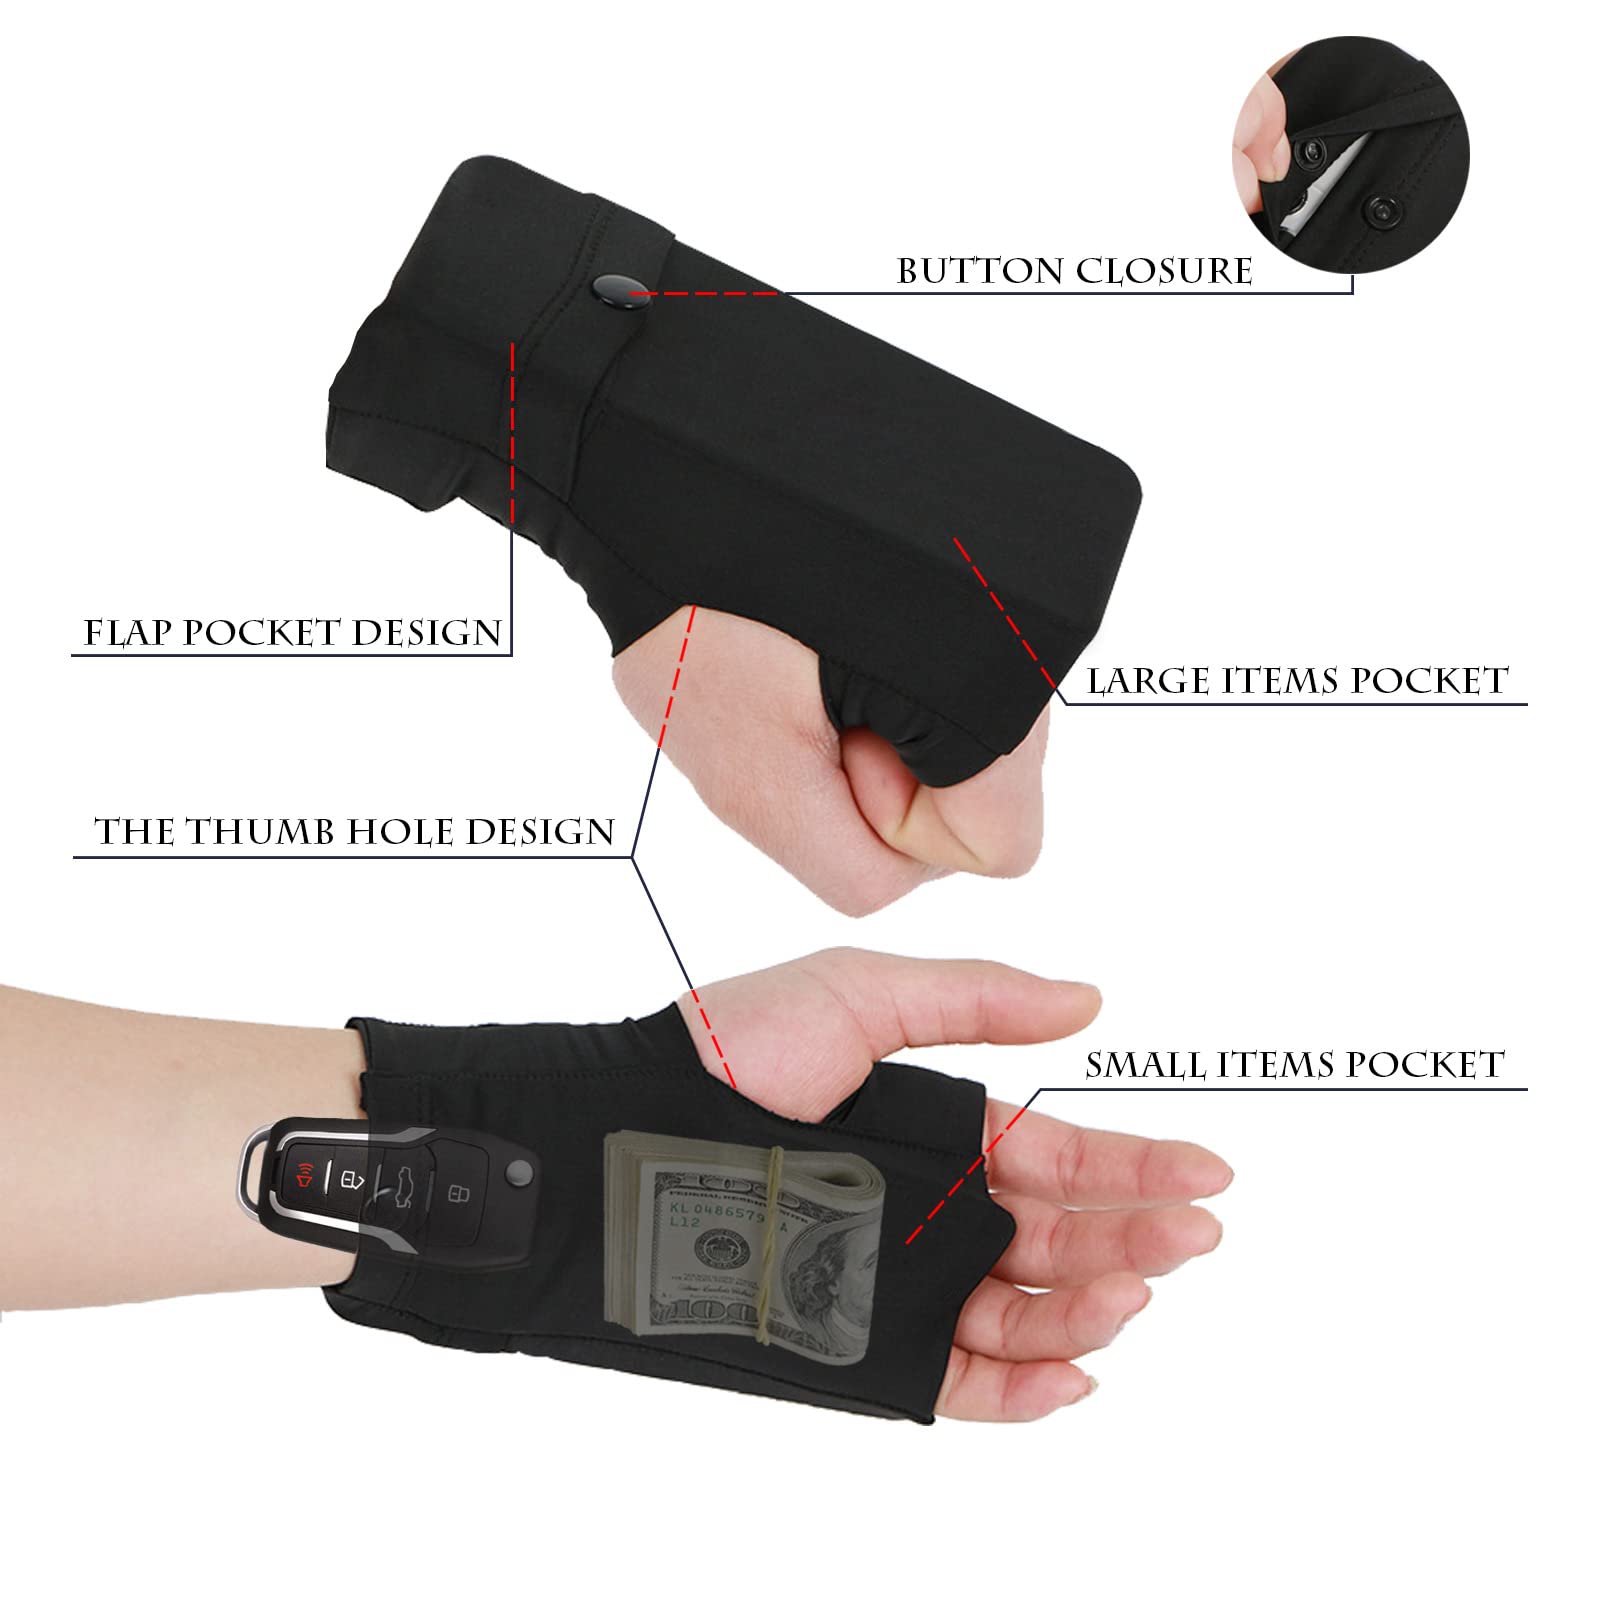 Sports Wrist Bag Portable Running Wallet Wristband Wrist Wallet for Women Men Wrist Pouch Phone Sleeve Forearm Wristband Phone Holder for Cards, Keys, Wrist Storage Band Pouch for Outdoors, Black, S